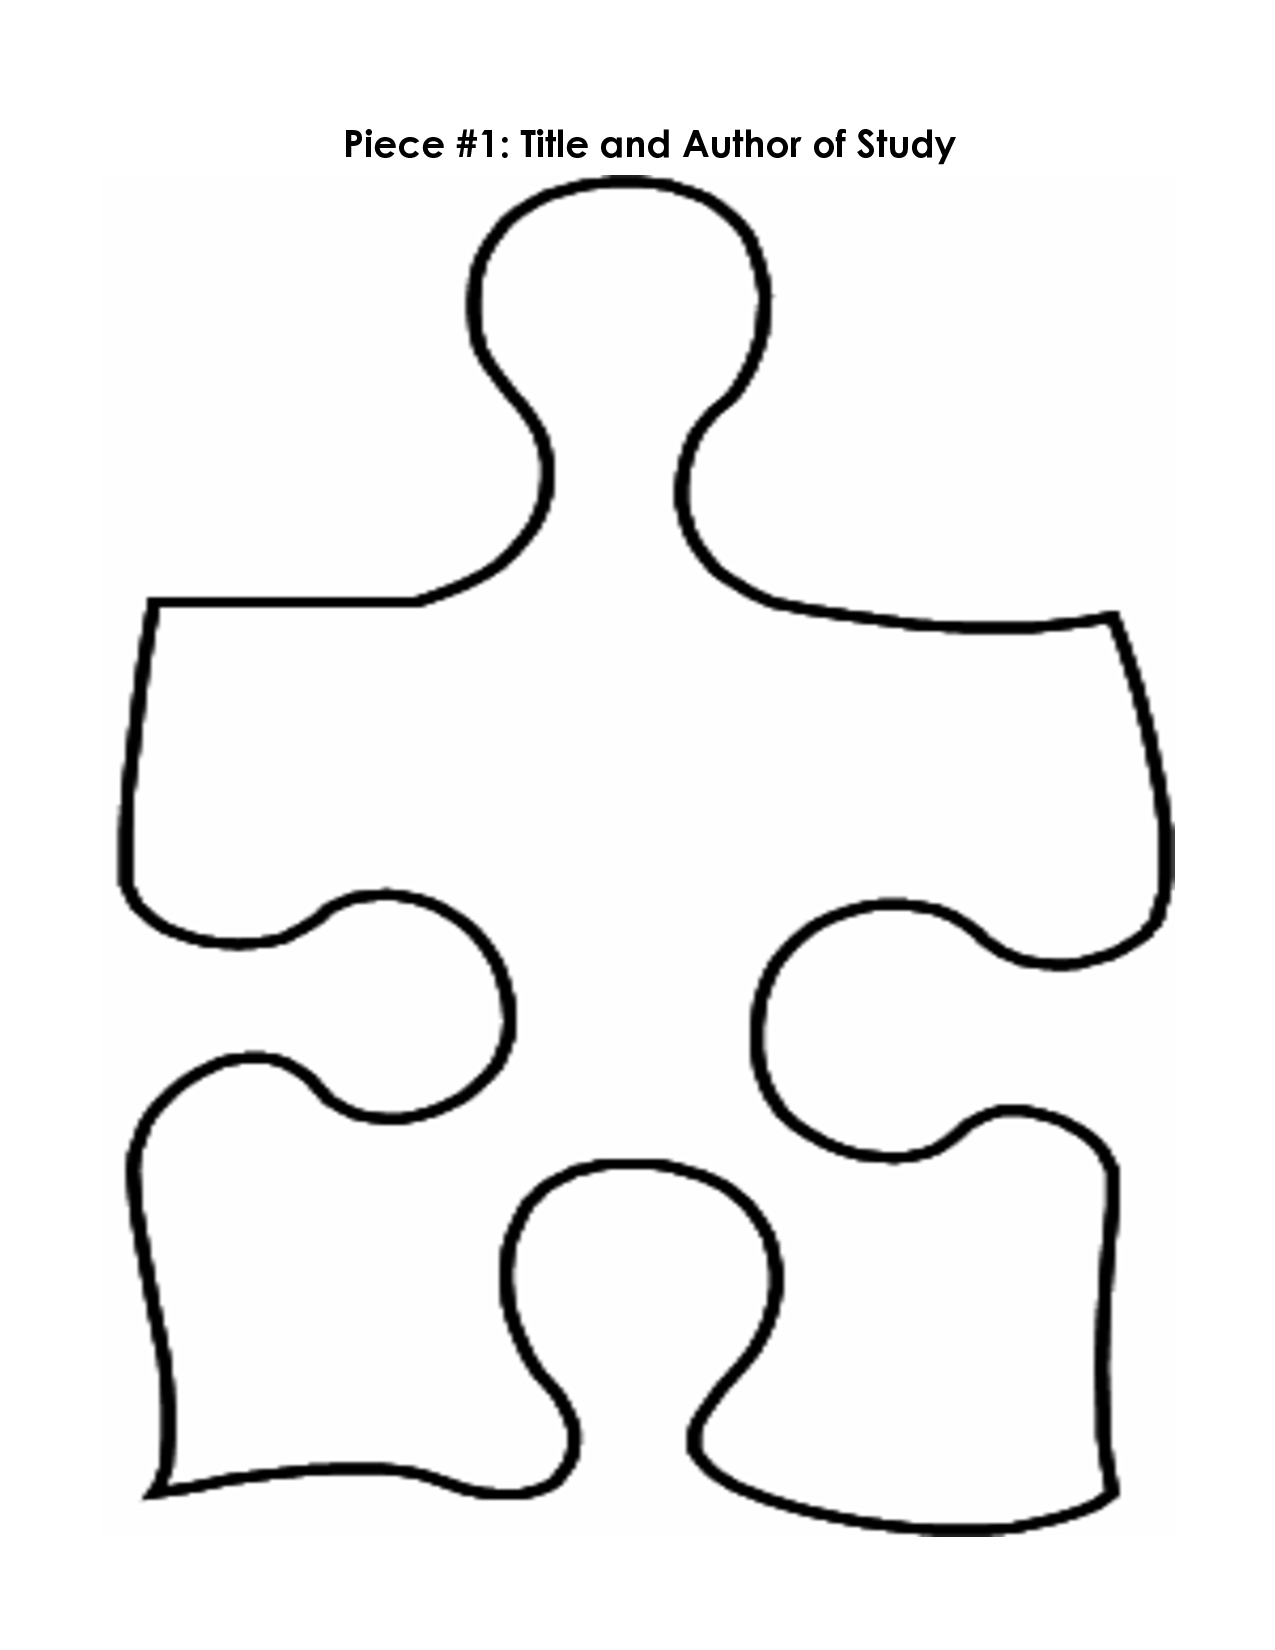 Free Puzzle Piece Template, Download Free Clip Art, Free Clip Art On - 8 Piece Puzzle Printable